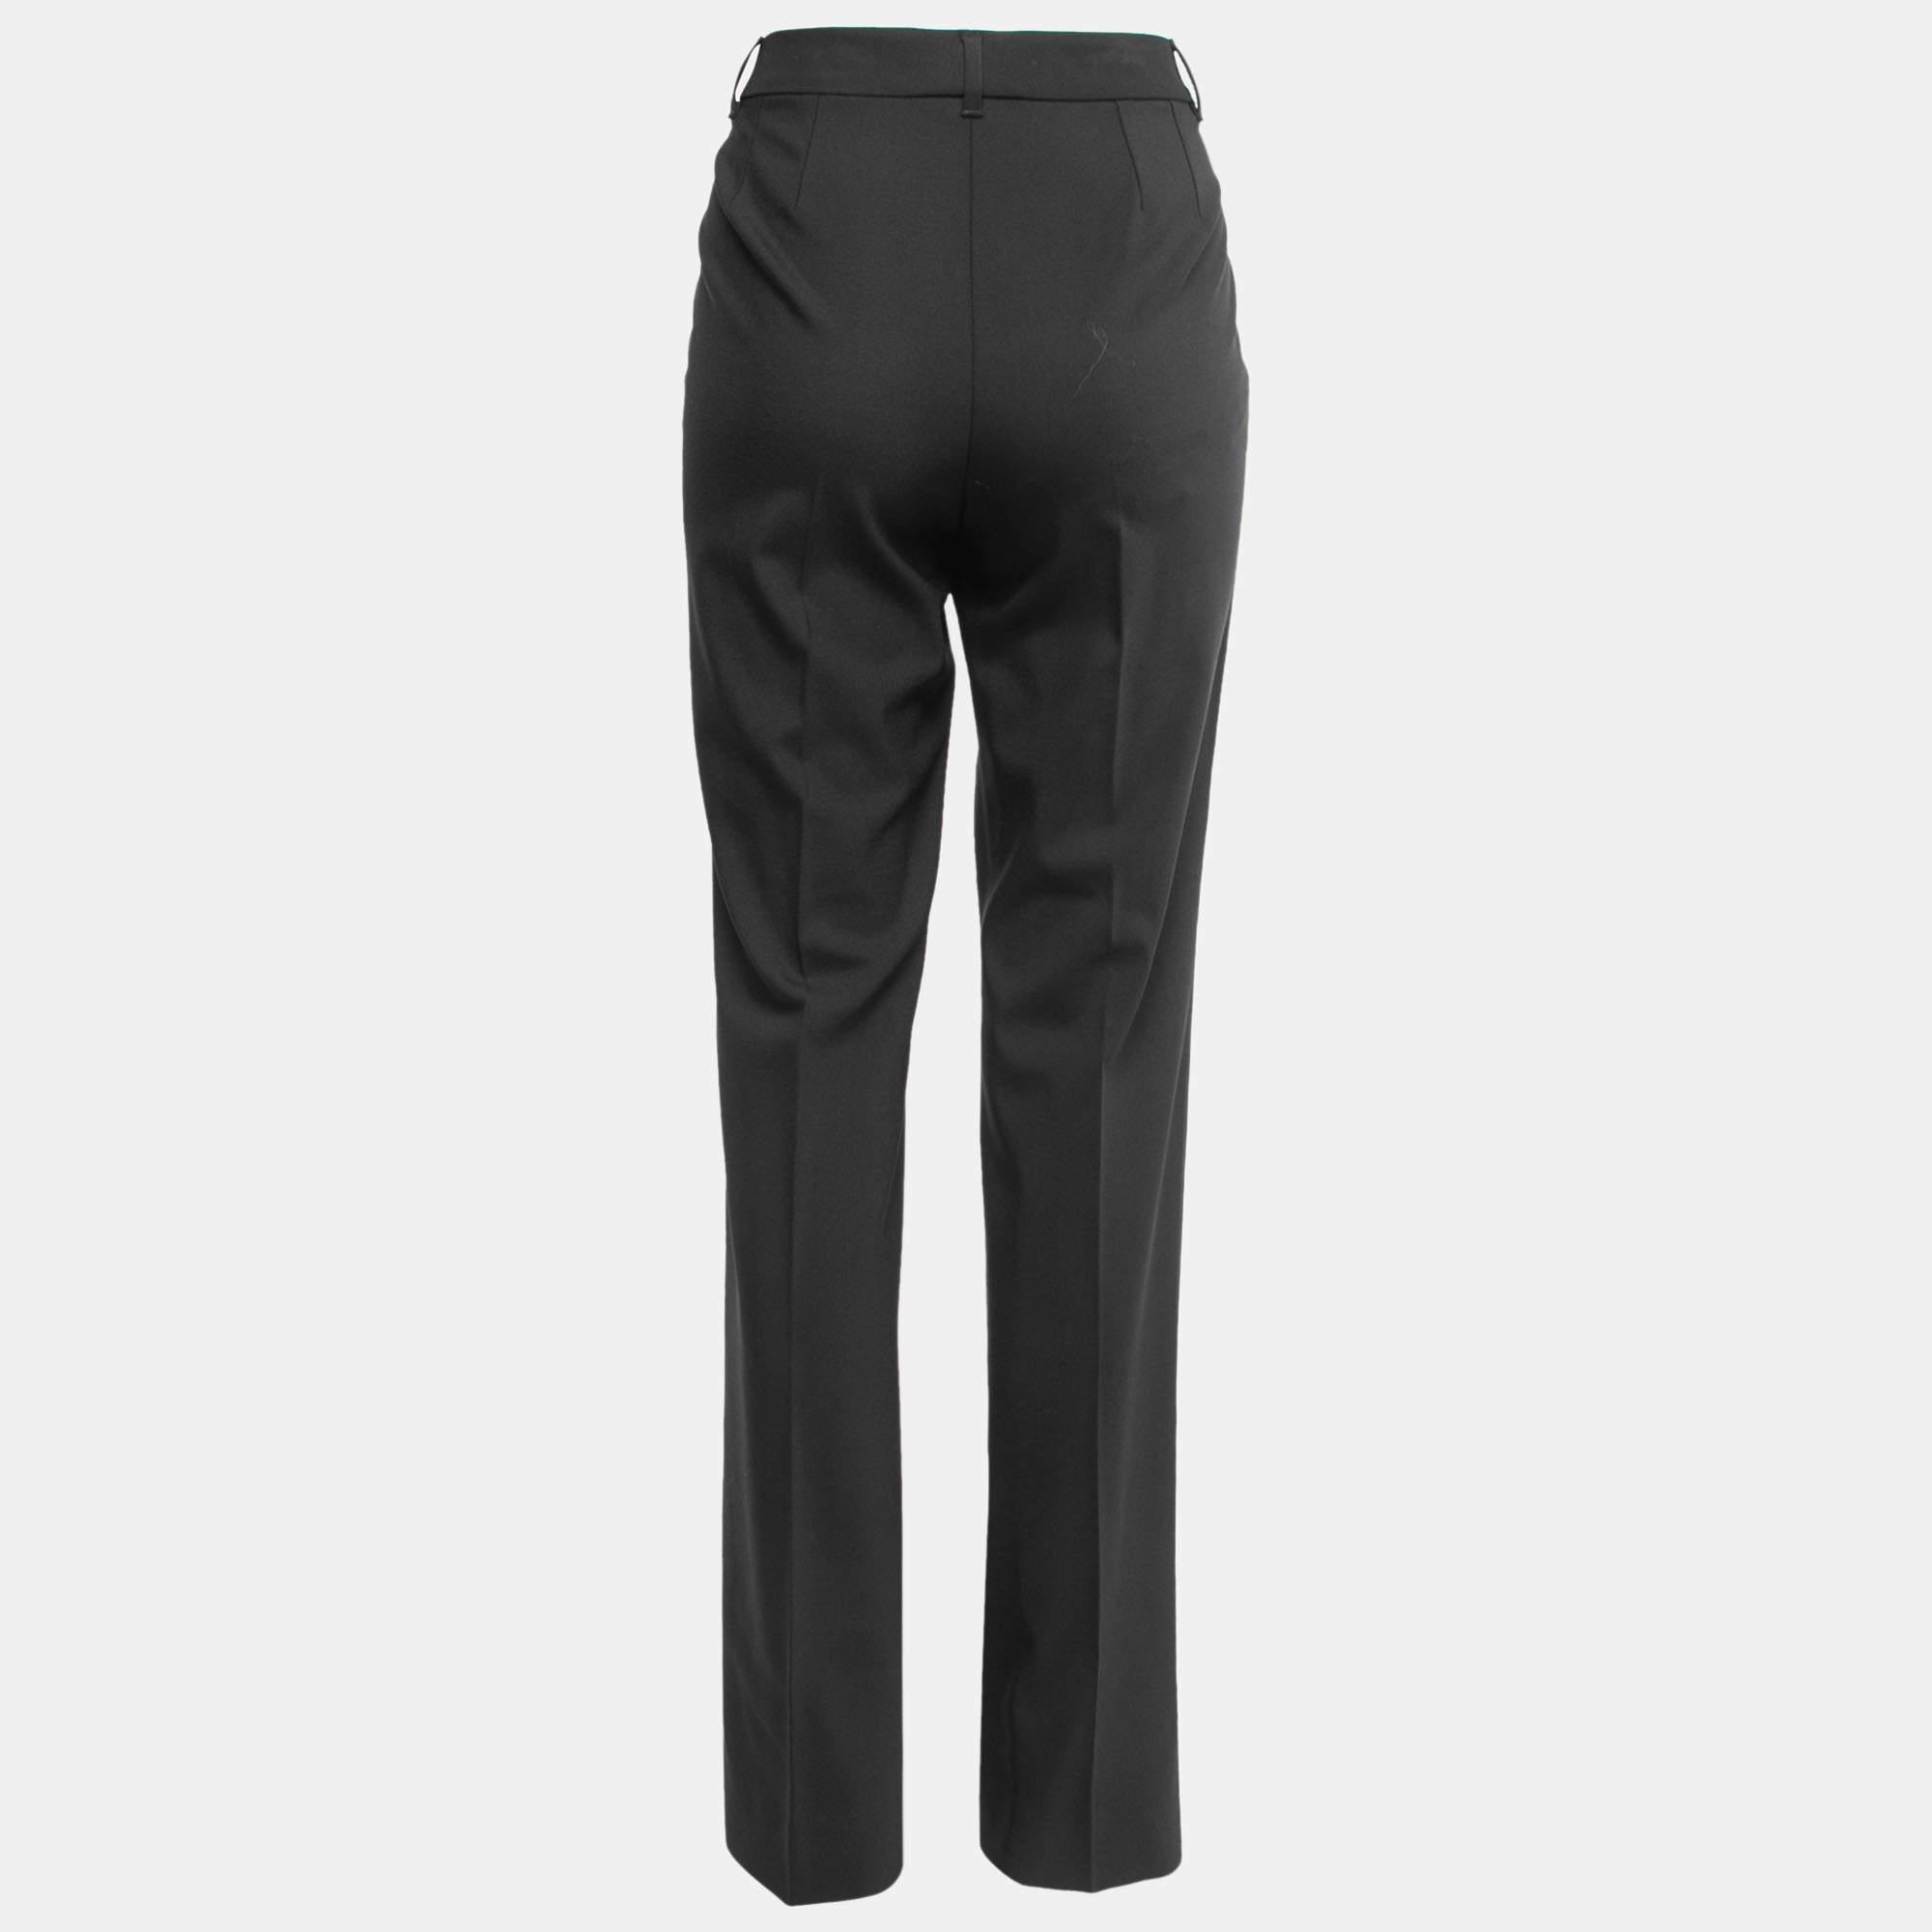 Enhance your formal attire with this pair of trousers. Designed into a superb silhouette and fit, this pair of trousers will definitely make you look elegant.

